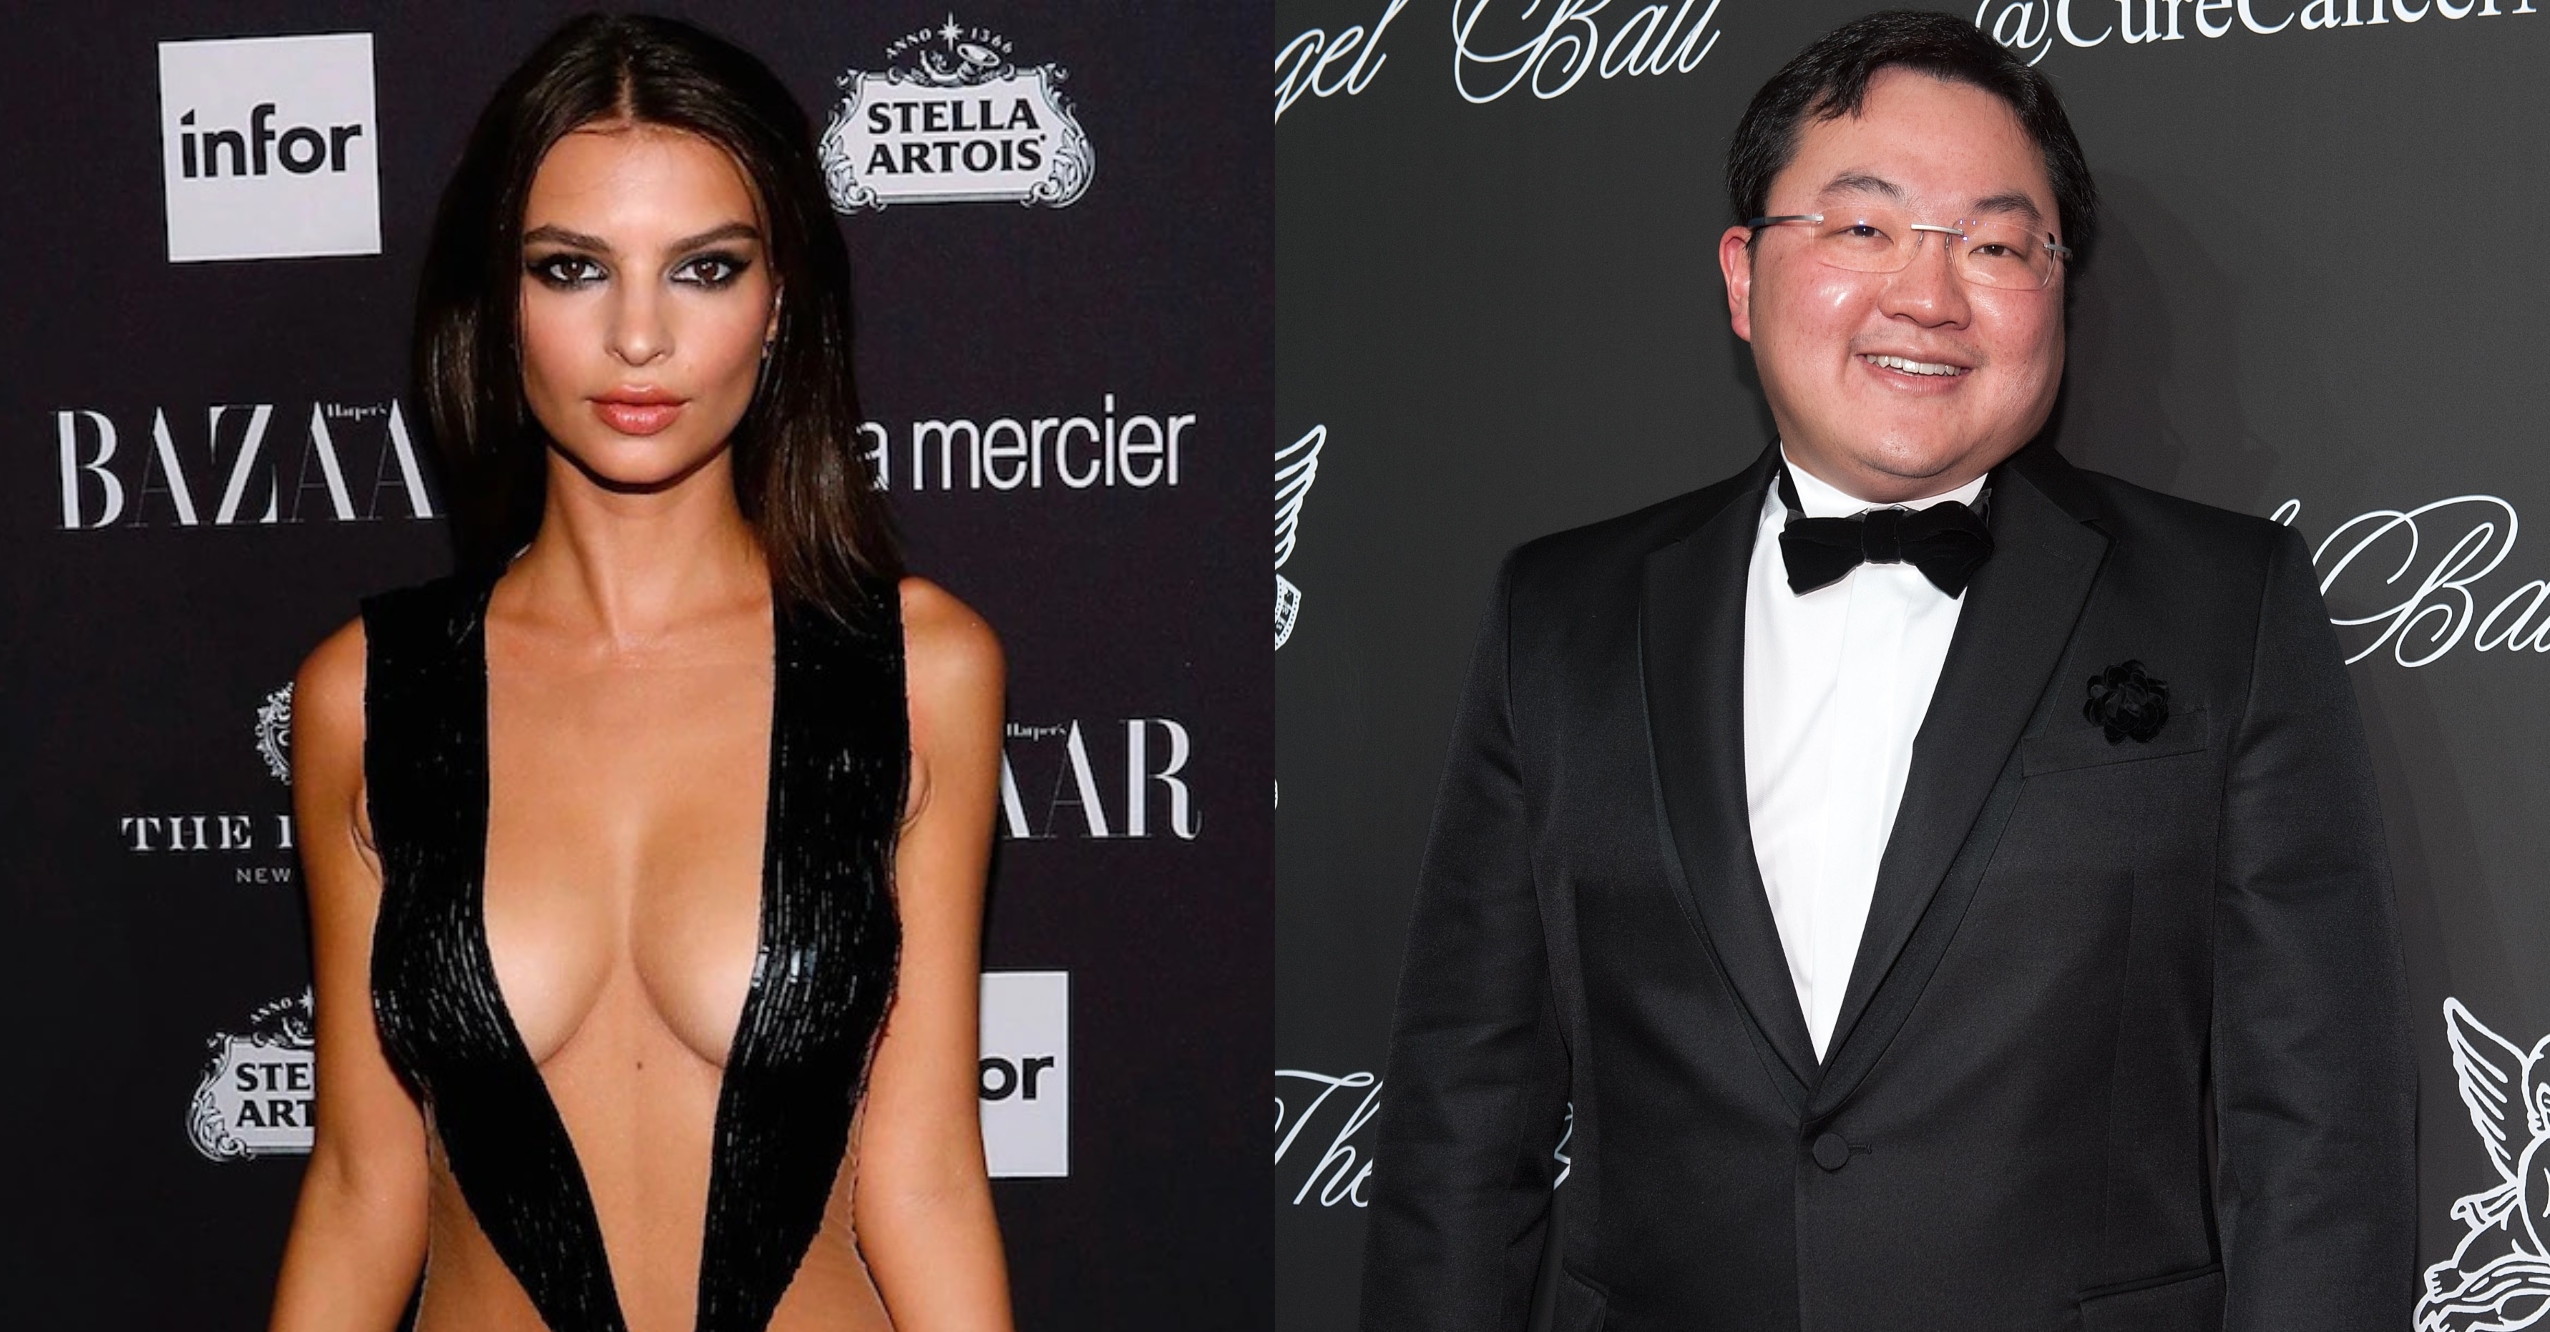 An International Fugitive Paid Emily Ratajkowski $25,000 to Be His Super Bowl Date pic